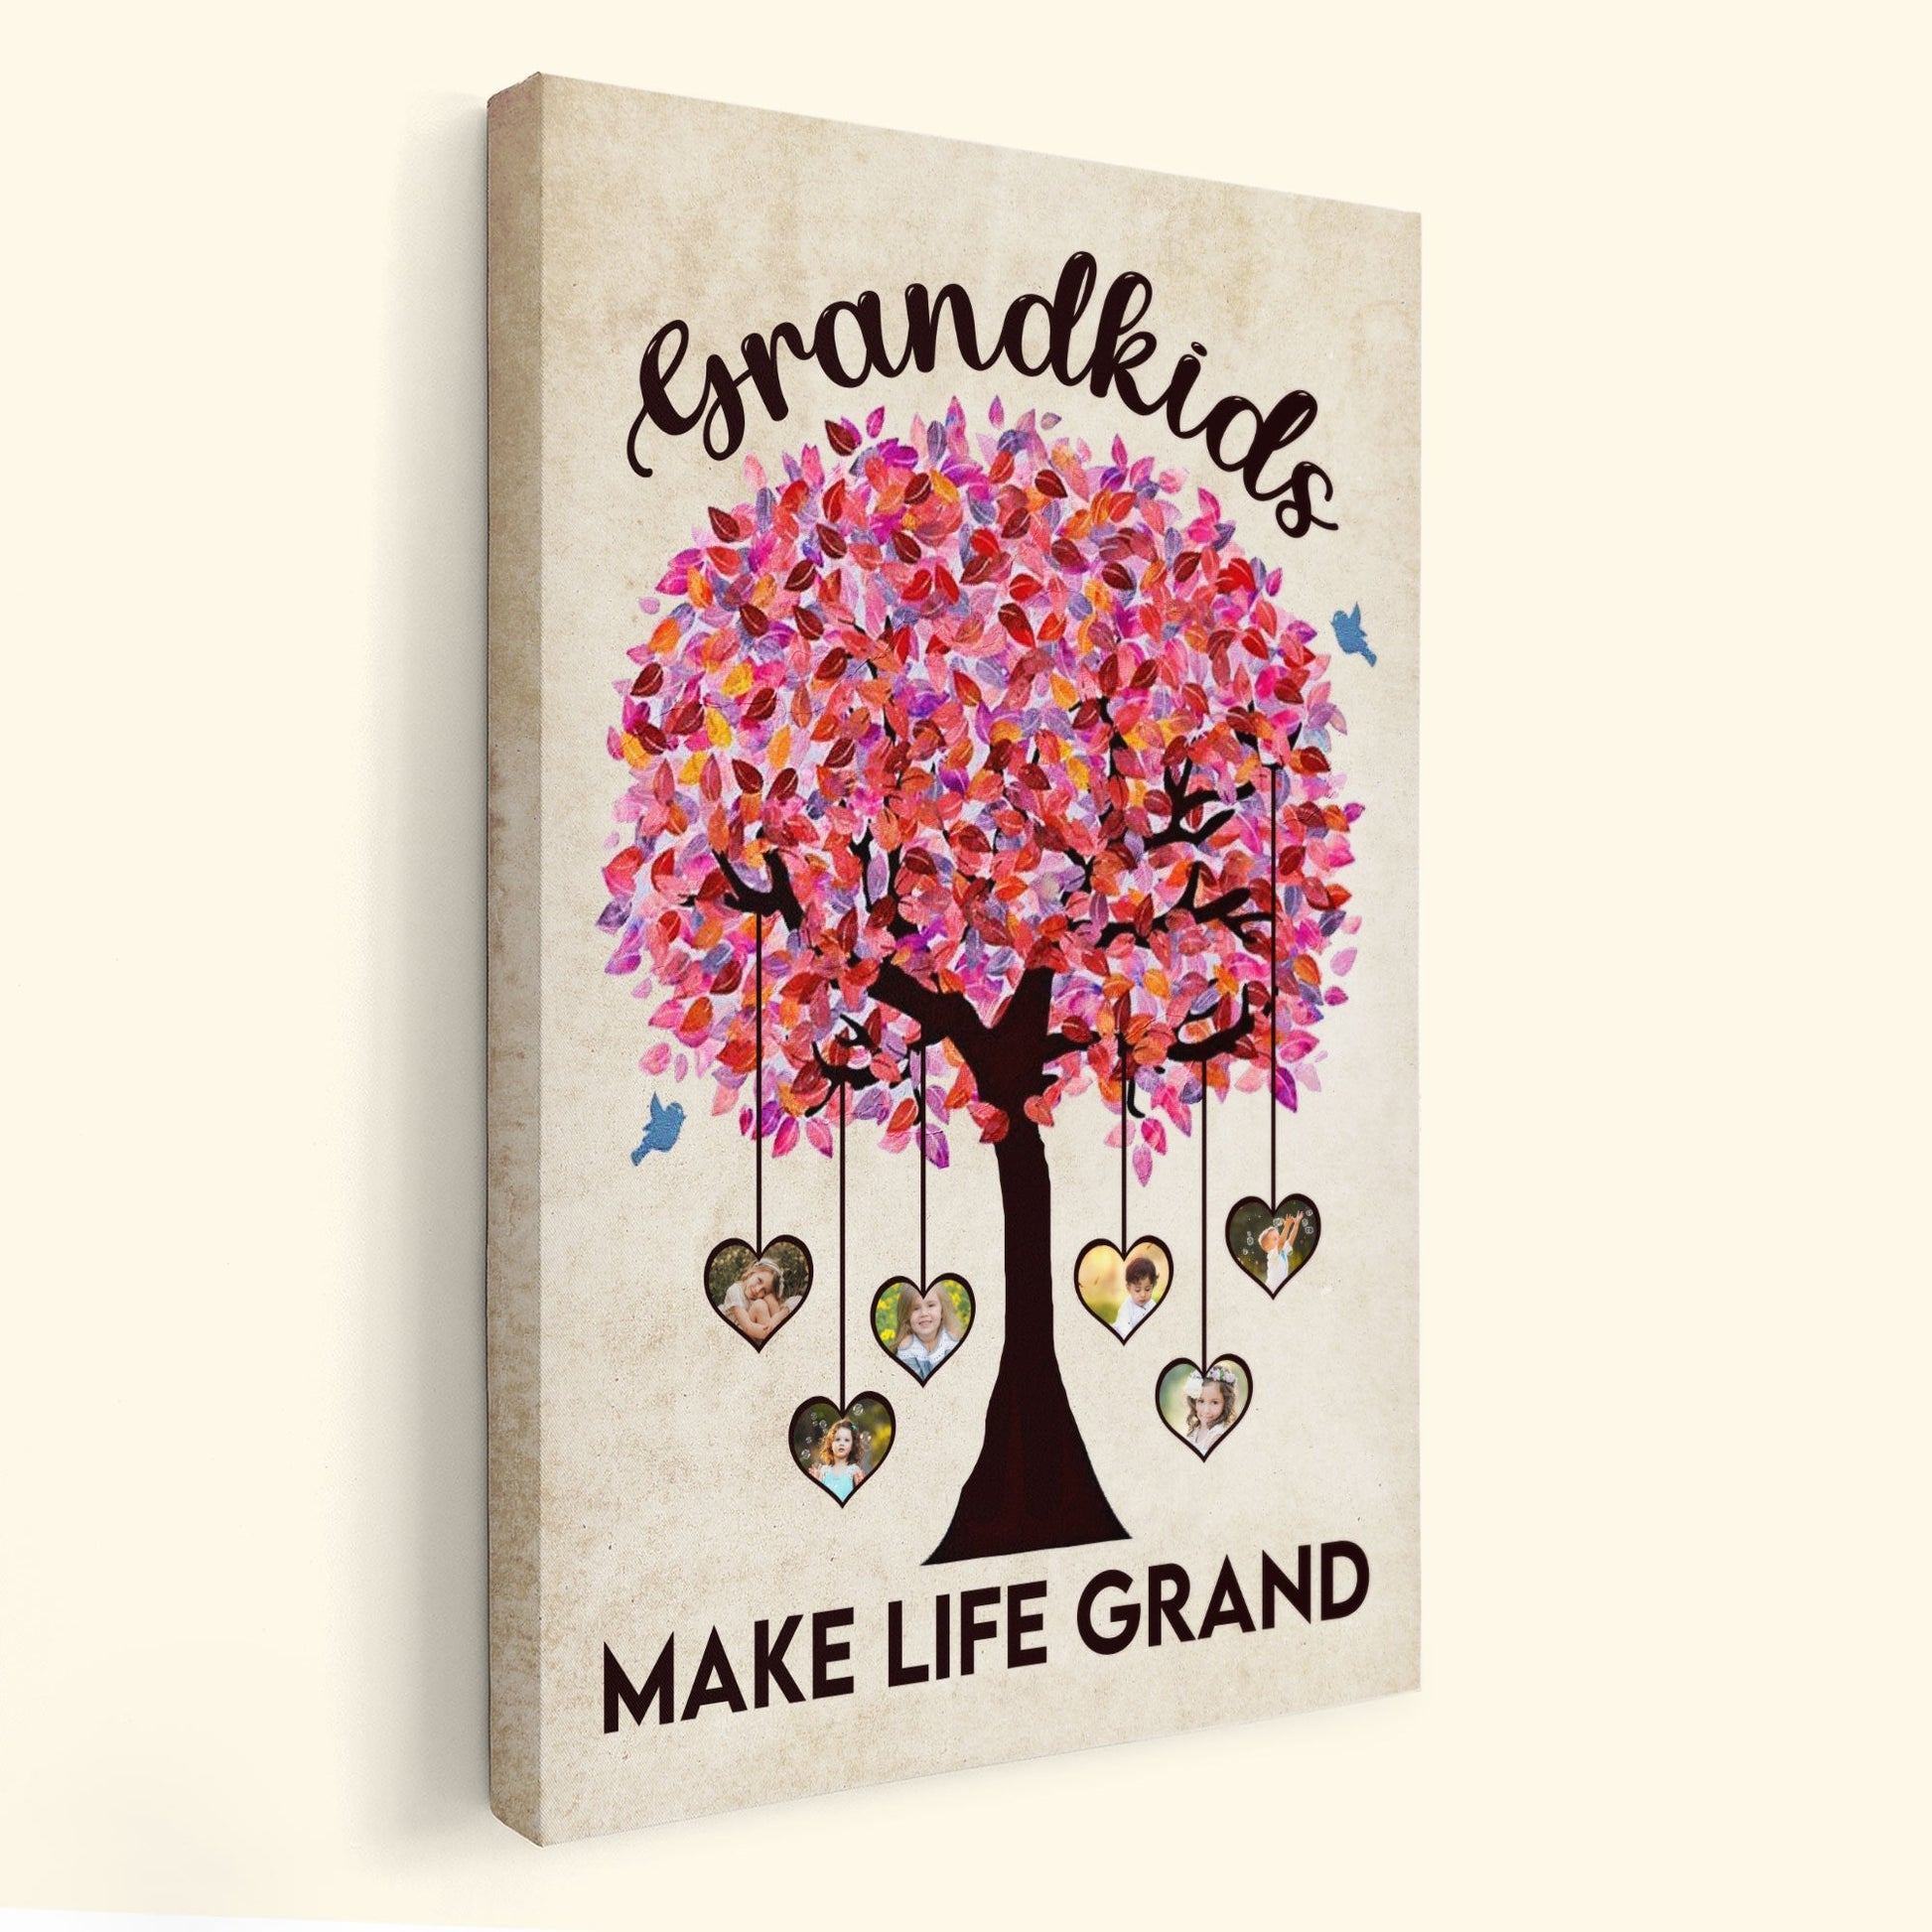 Custom Grandma Gift From Grandkids, Grandmother Christmas Gifts With  Grandkids Name, Grandma Garden Gifts Canvas - Best Personalized Gifts For  Everyone